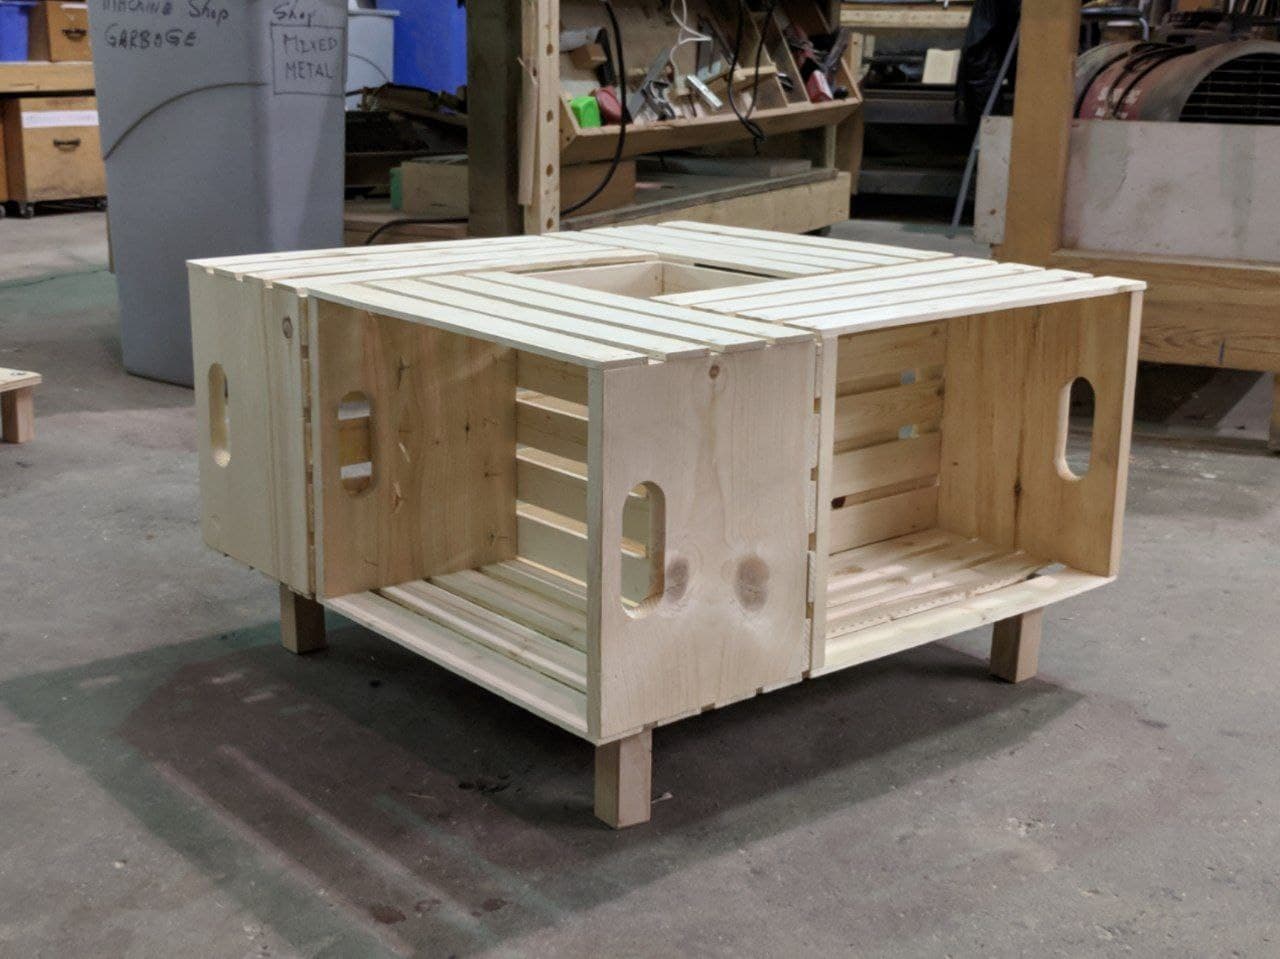 the table before staining. four box-like wine crates are on their sides and joined together in a spiral. a messy wood shop is in the background